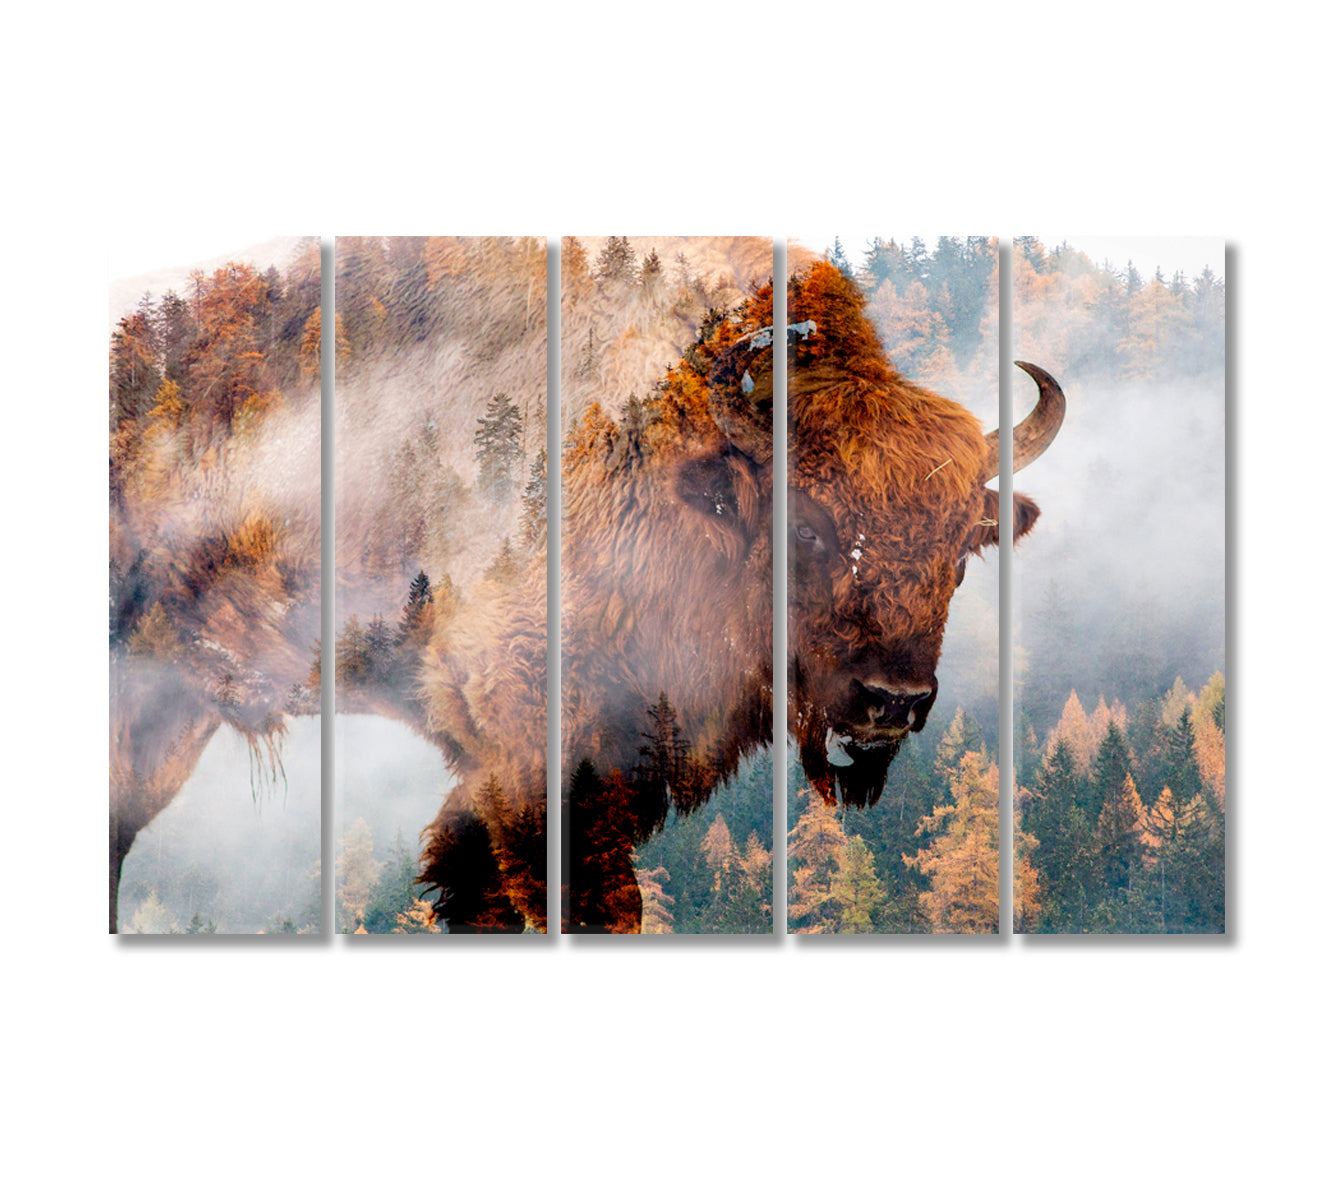 Bison in Forest Art For Home-Canvas Print-CetArt-5 Panels-36x24 inches-CetArt